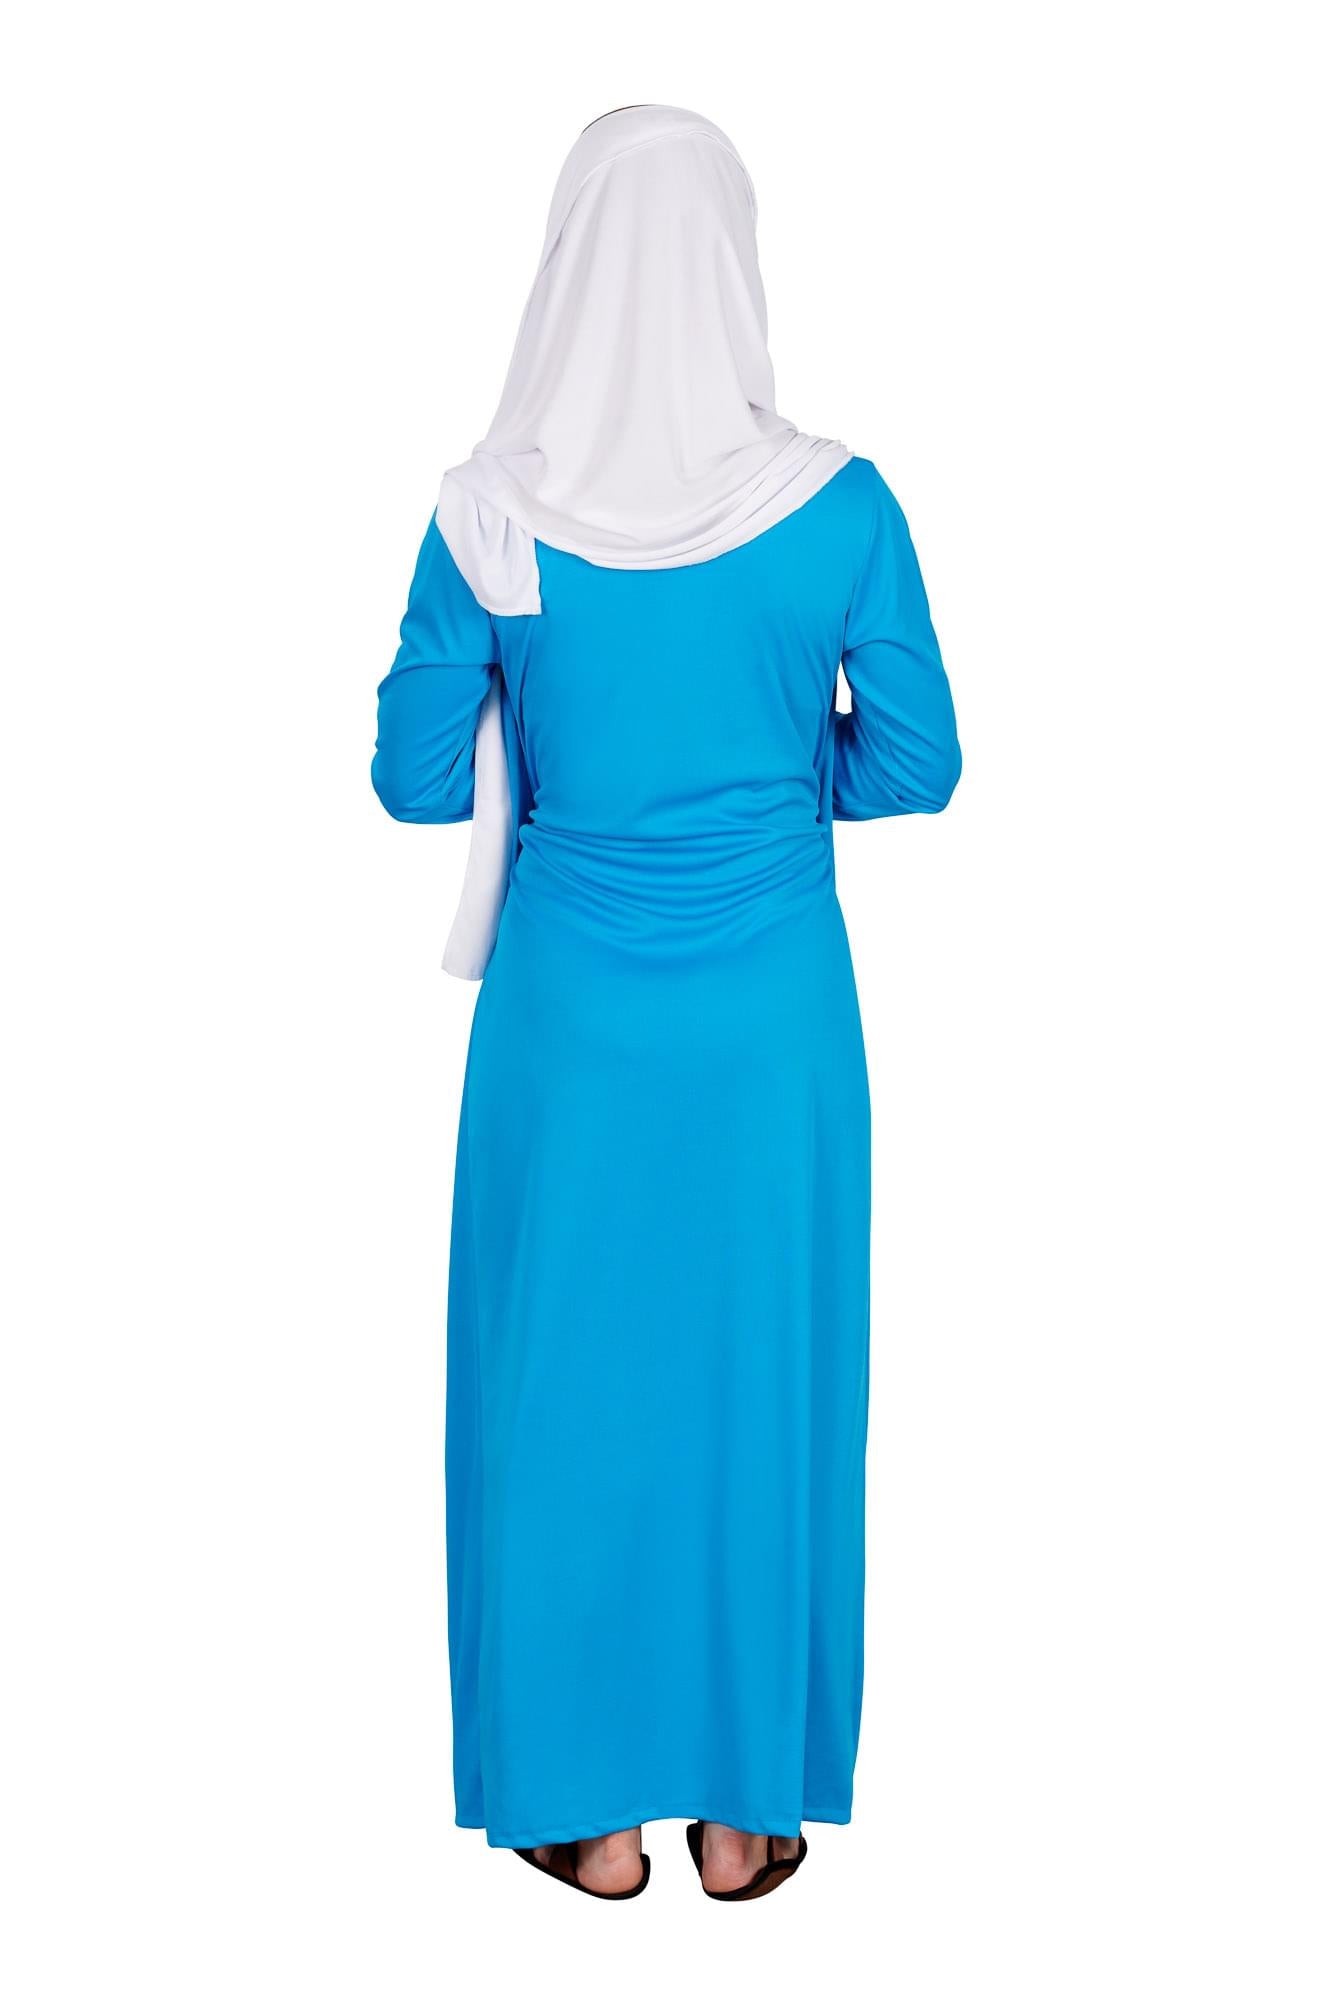 Mary Adult Biblical Costume | One Size